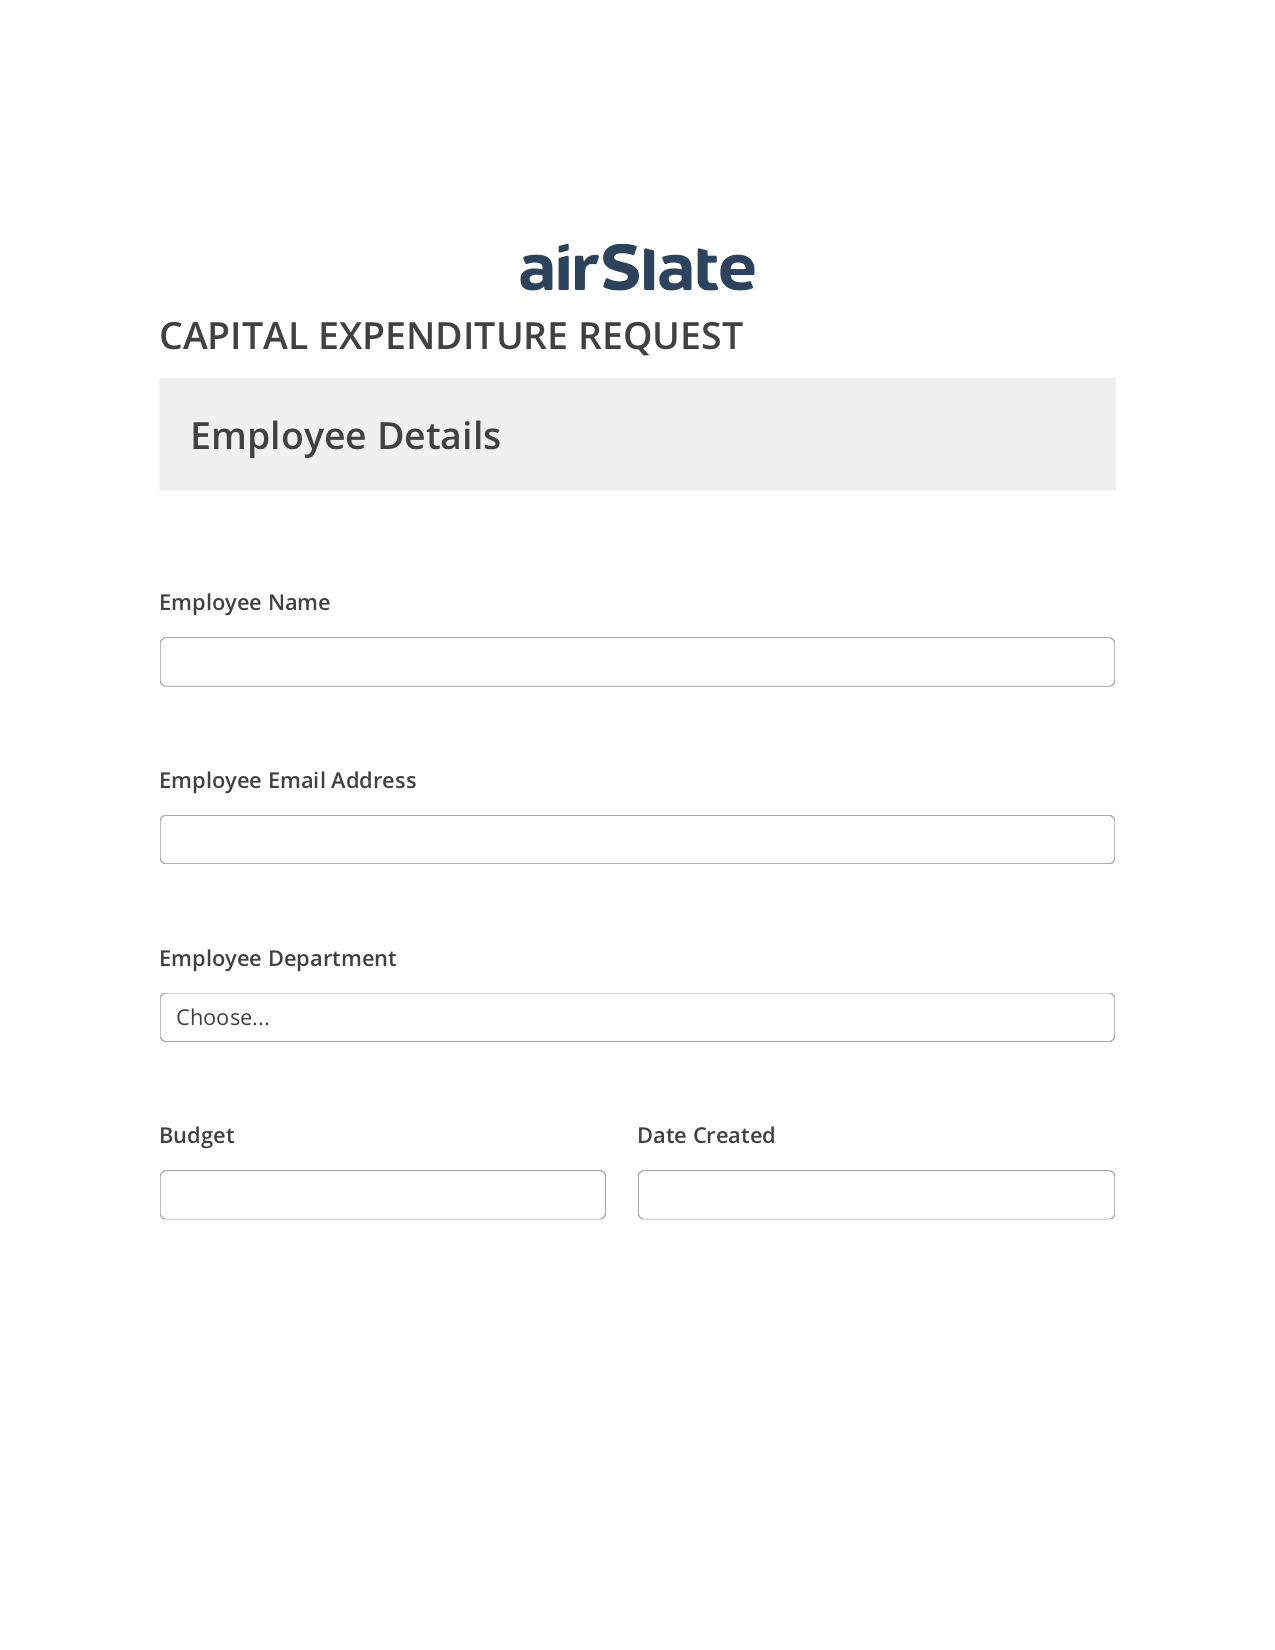 Multirole Capital Expenditure Request Approval Workflow Pre-fill from Google Sheet Dropdown Options Bot, Rename Slate Bot, Post-finish Document